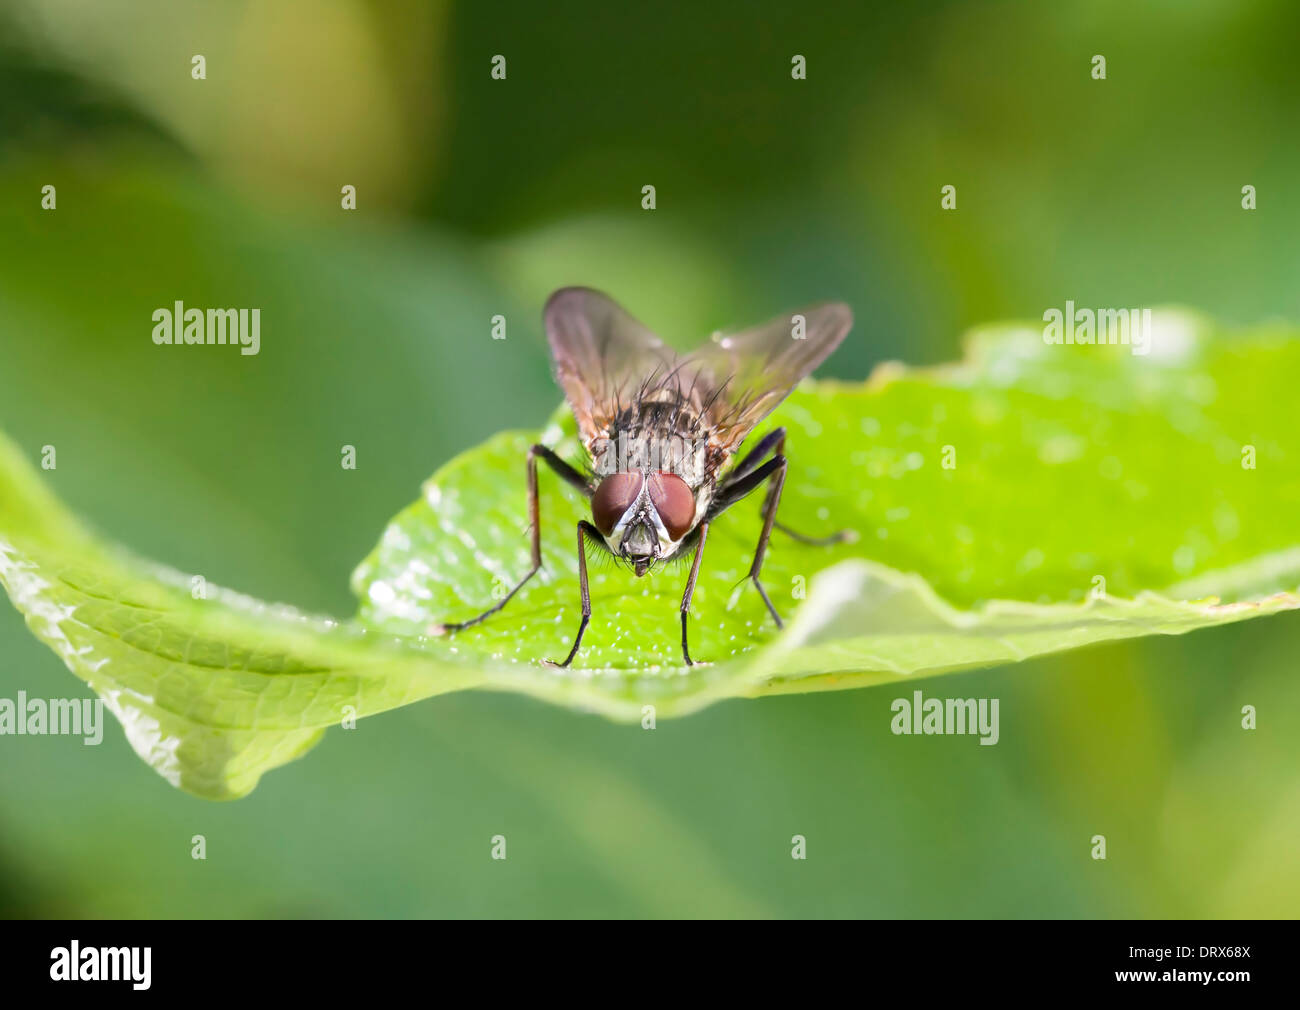 Closeup of a house fly on a green plant leaf Stock Photo